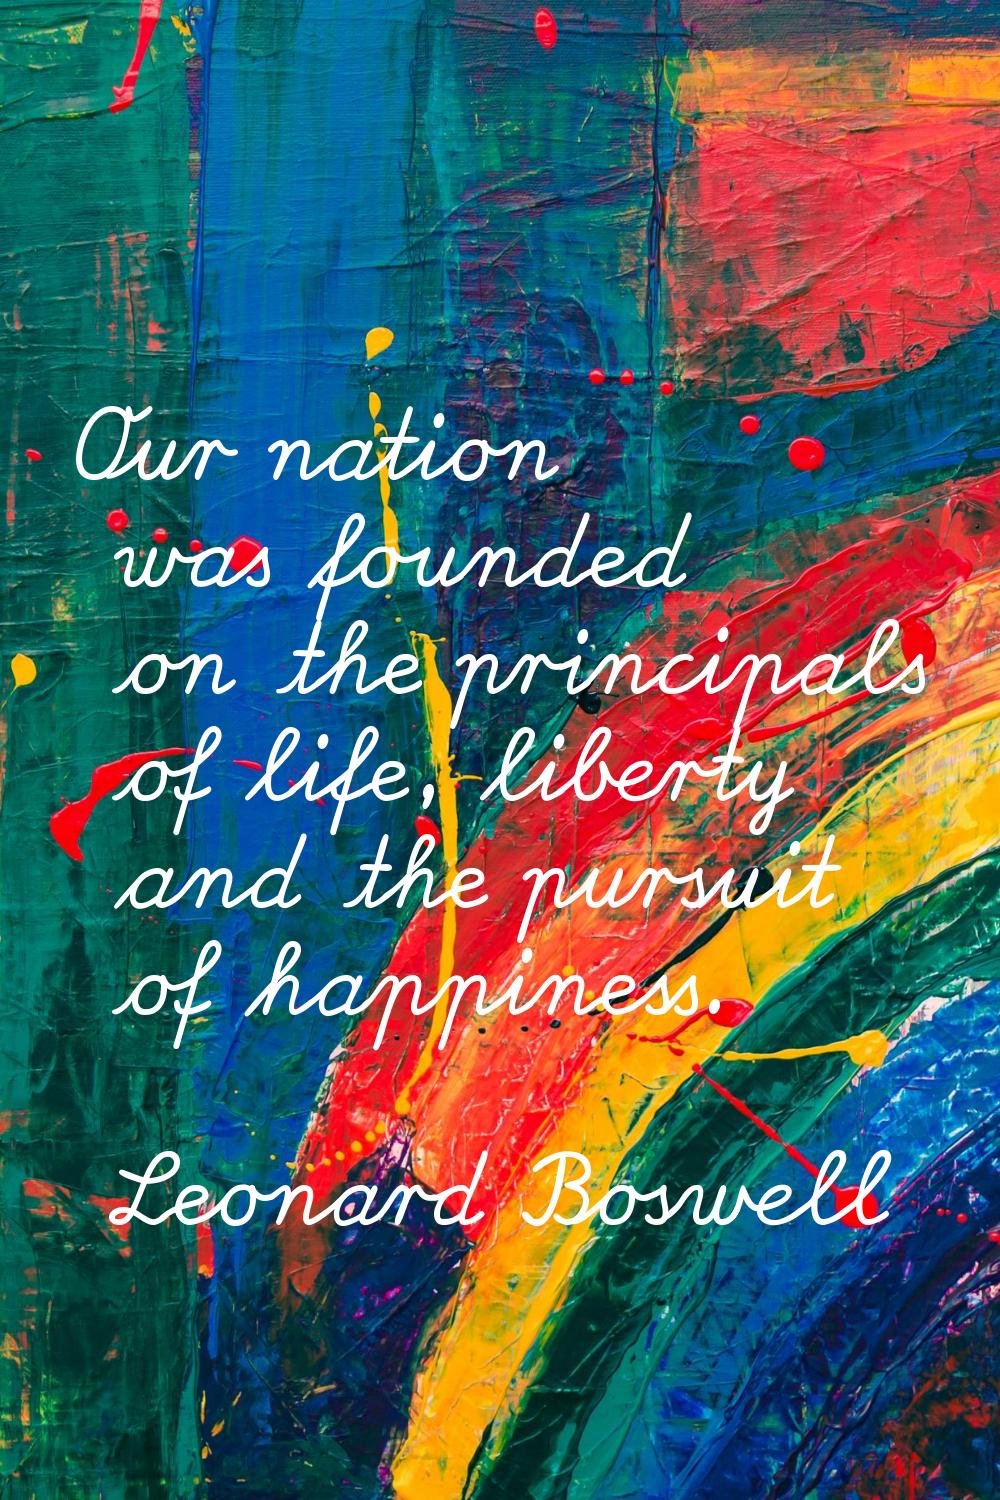 Our nation was founded on the principals of life, liberty and the pursuit of happiness.